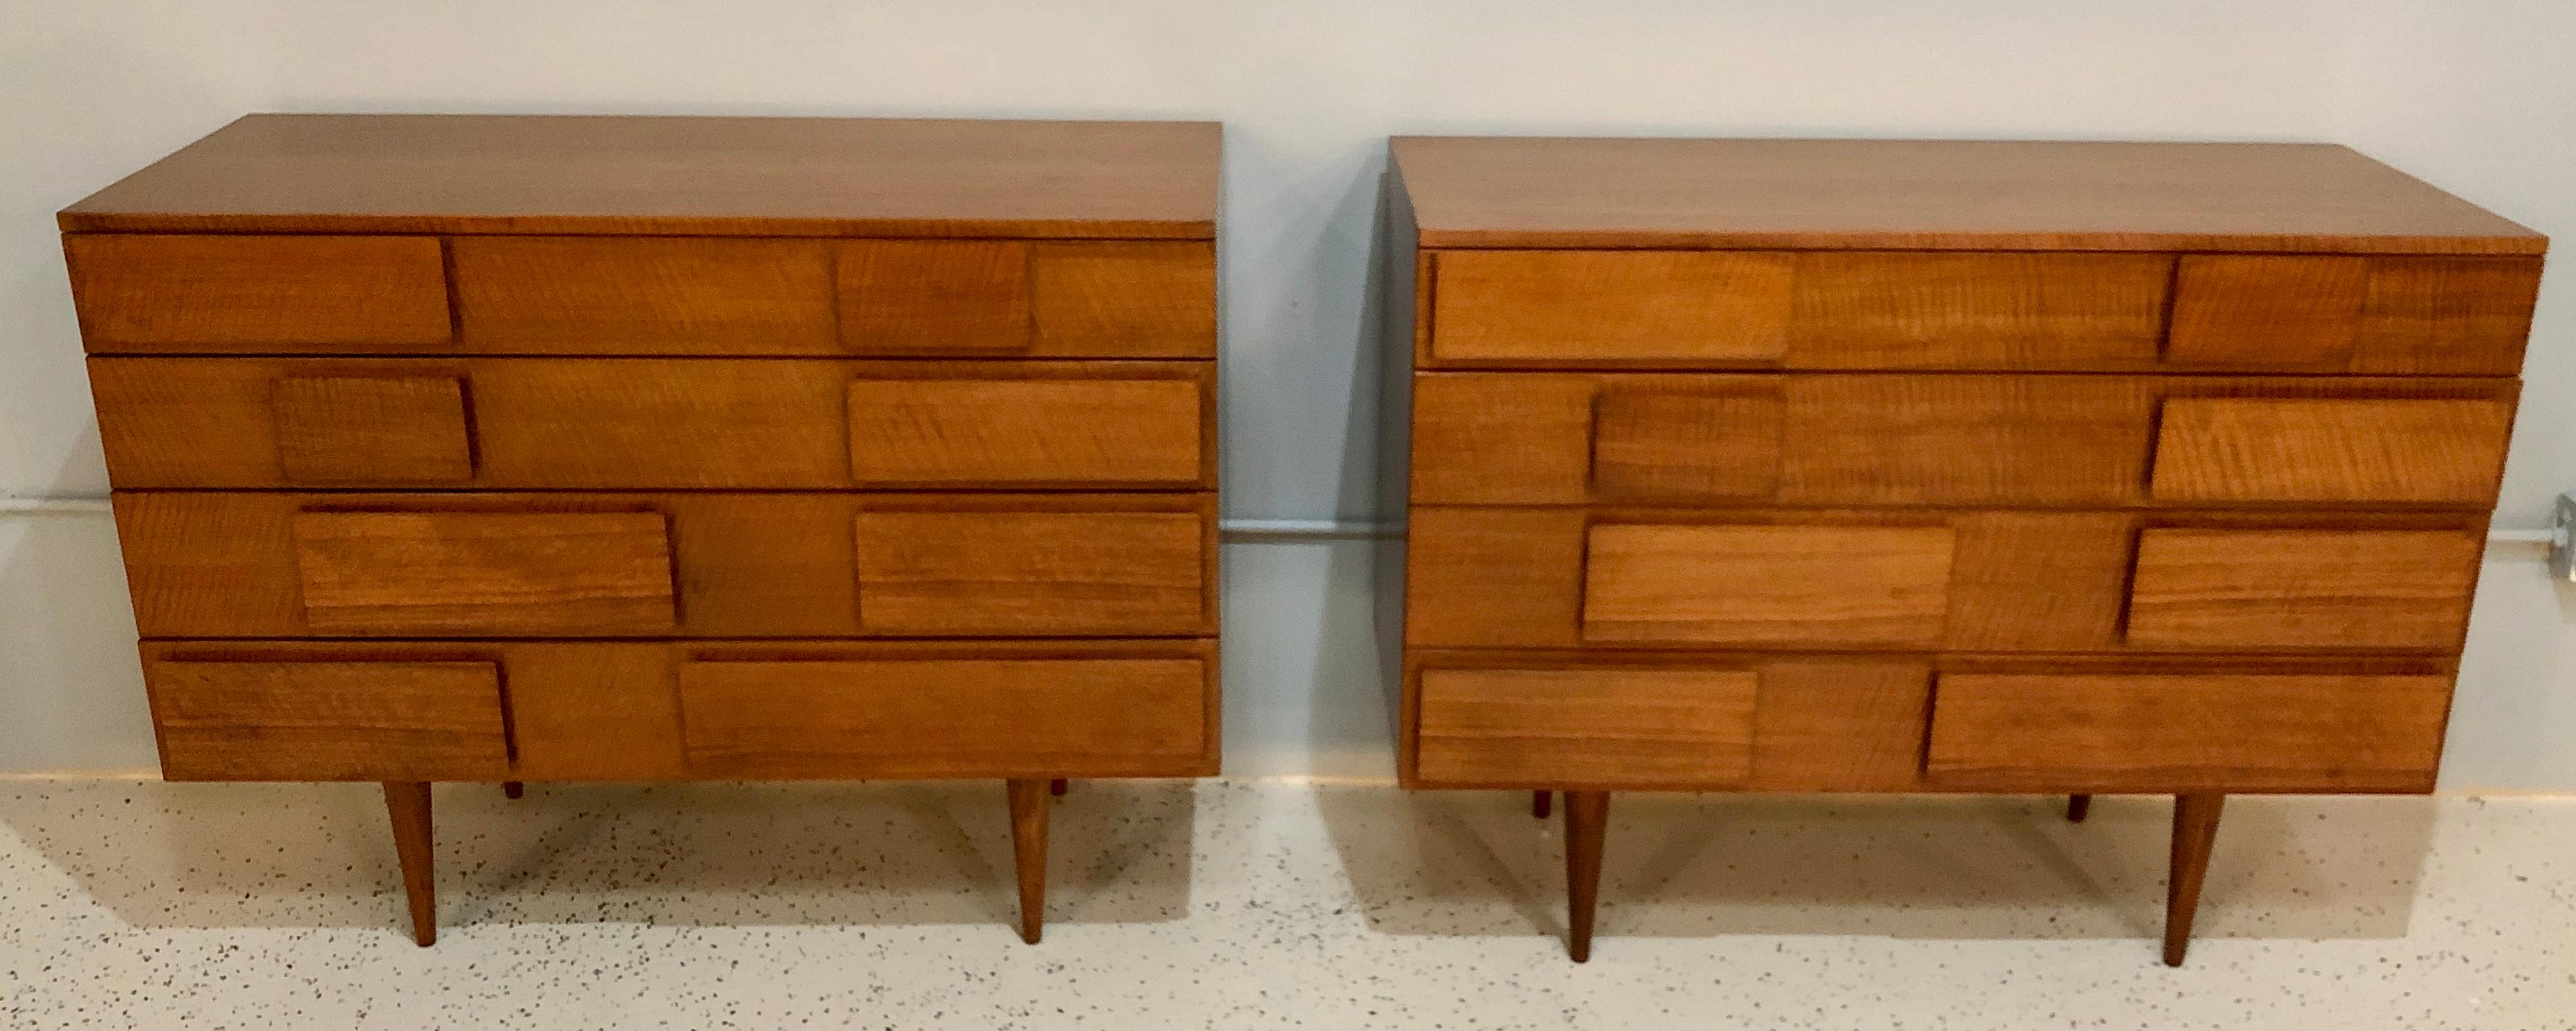 Pair of Gio Ponti Chests for Singer & Sons, model 2129, circa 1955.
Exceptional original vintage pair of Gio Ponti designed chests. Labeled M. Singer to drawer interior. Each having the signature Gio Ponti applied geometric wood accents and tapered